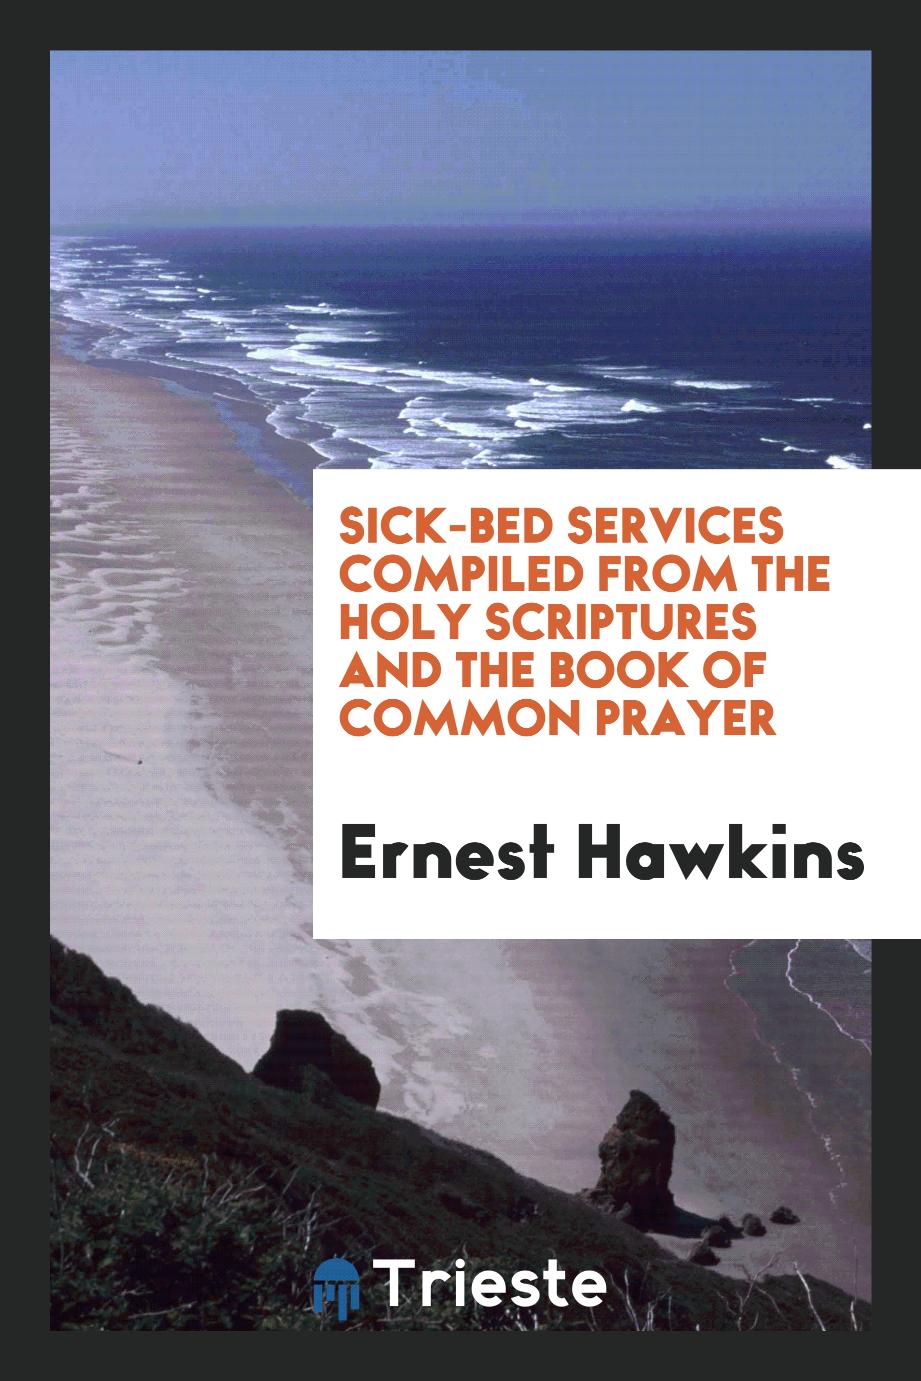 Sick-bed services compiled from the holy scriptures and the Book of common prayer